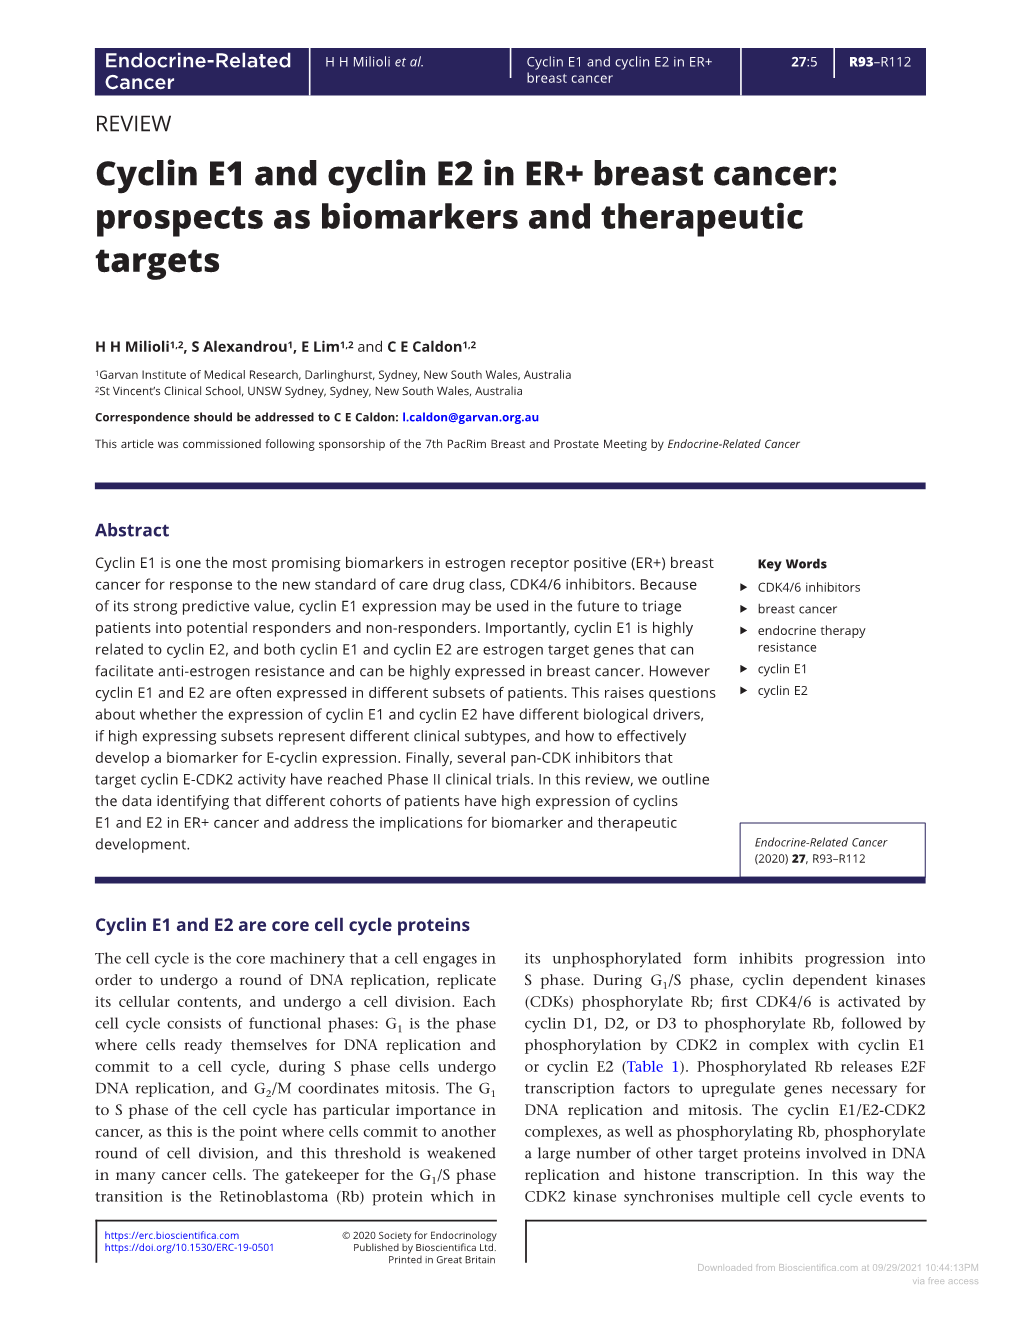 Cyclin E1 and Cyclin E2 in ER+ Breast Cancer: Prospects As Biomarkers and Therapeutic Targets